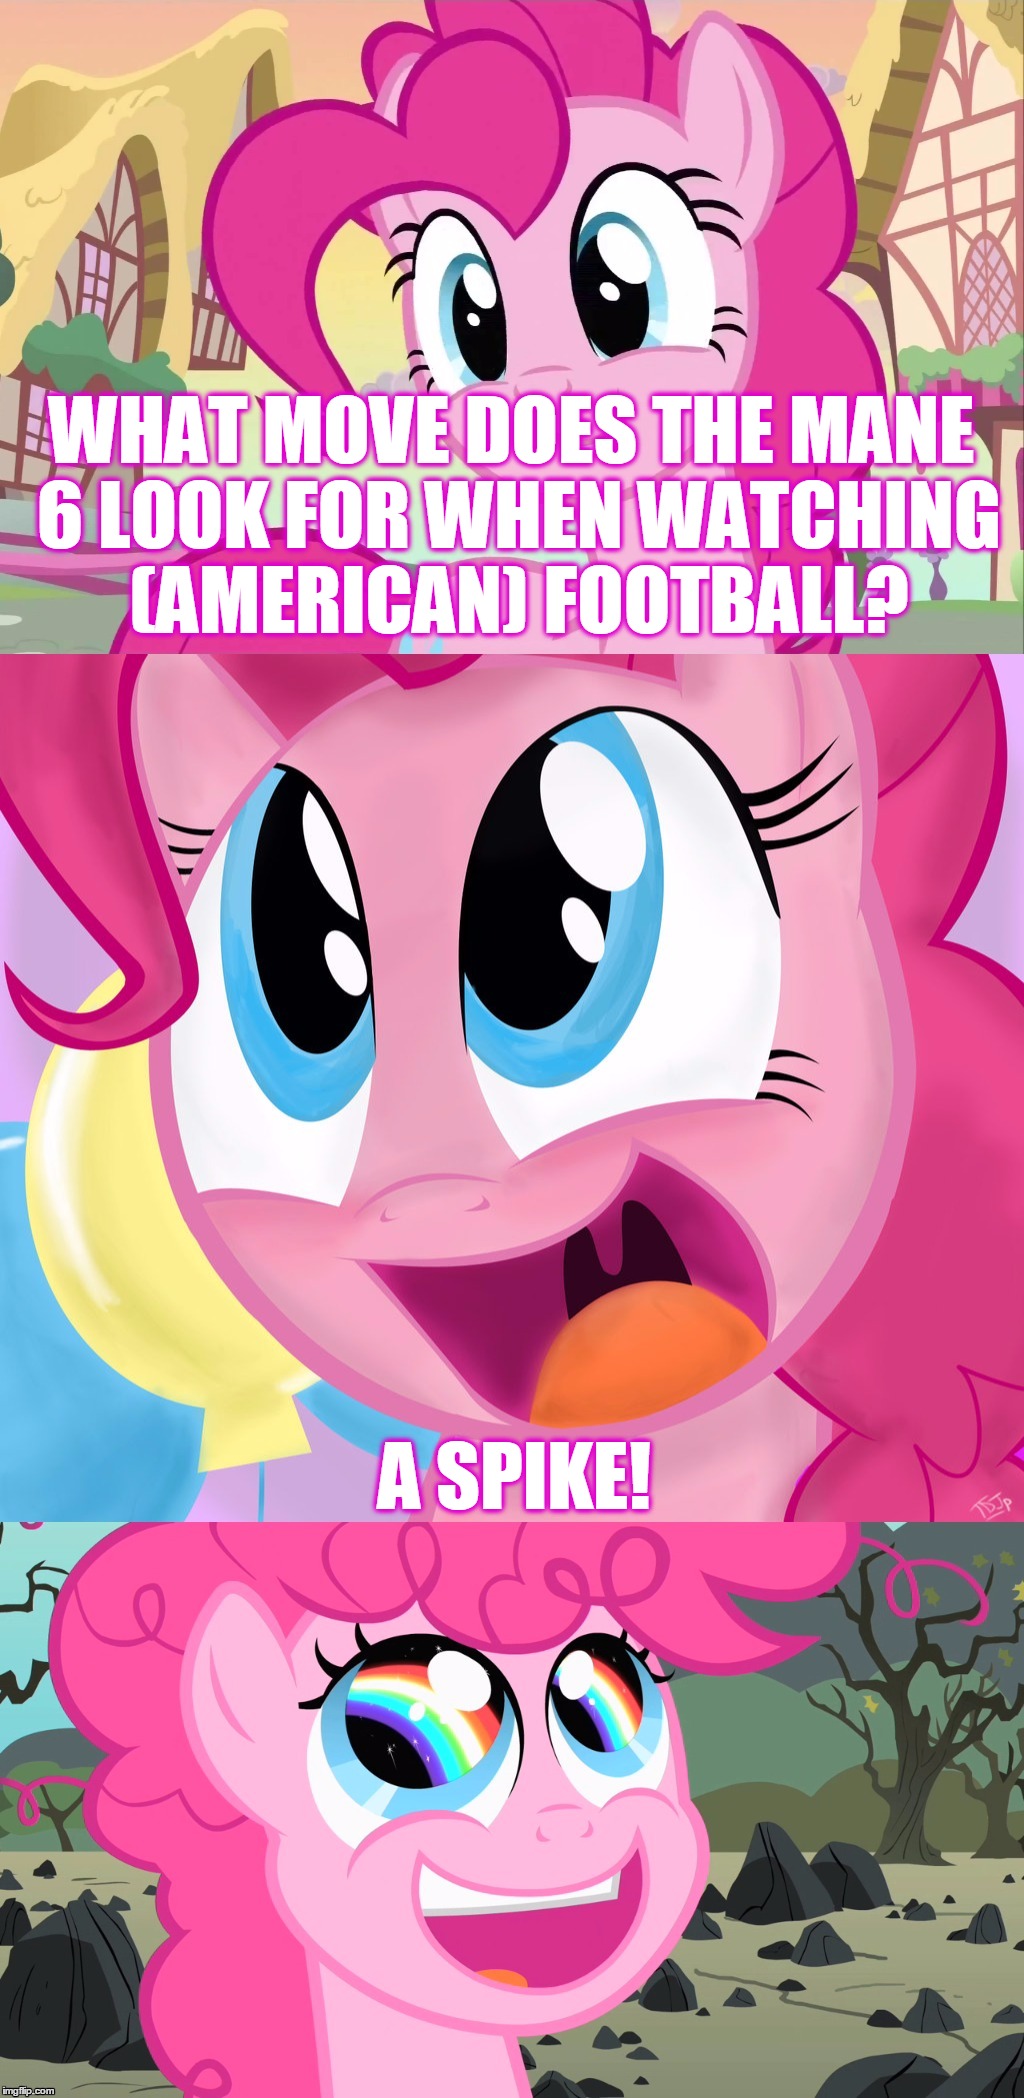 Bad Pun Pinkie Pie | WHAT MOVE DOES THE MANE 6 LOOK FOR WHEN WATCHING (AMERICAN) FOOTBALL? A SPIKE! | image tagged in bad pun pinkie pie | made w/ Imgflip meme maker